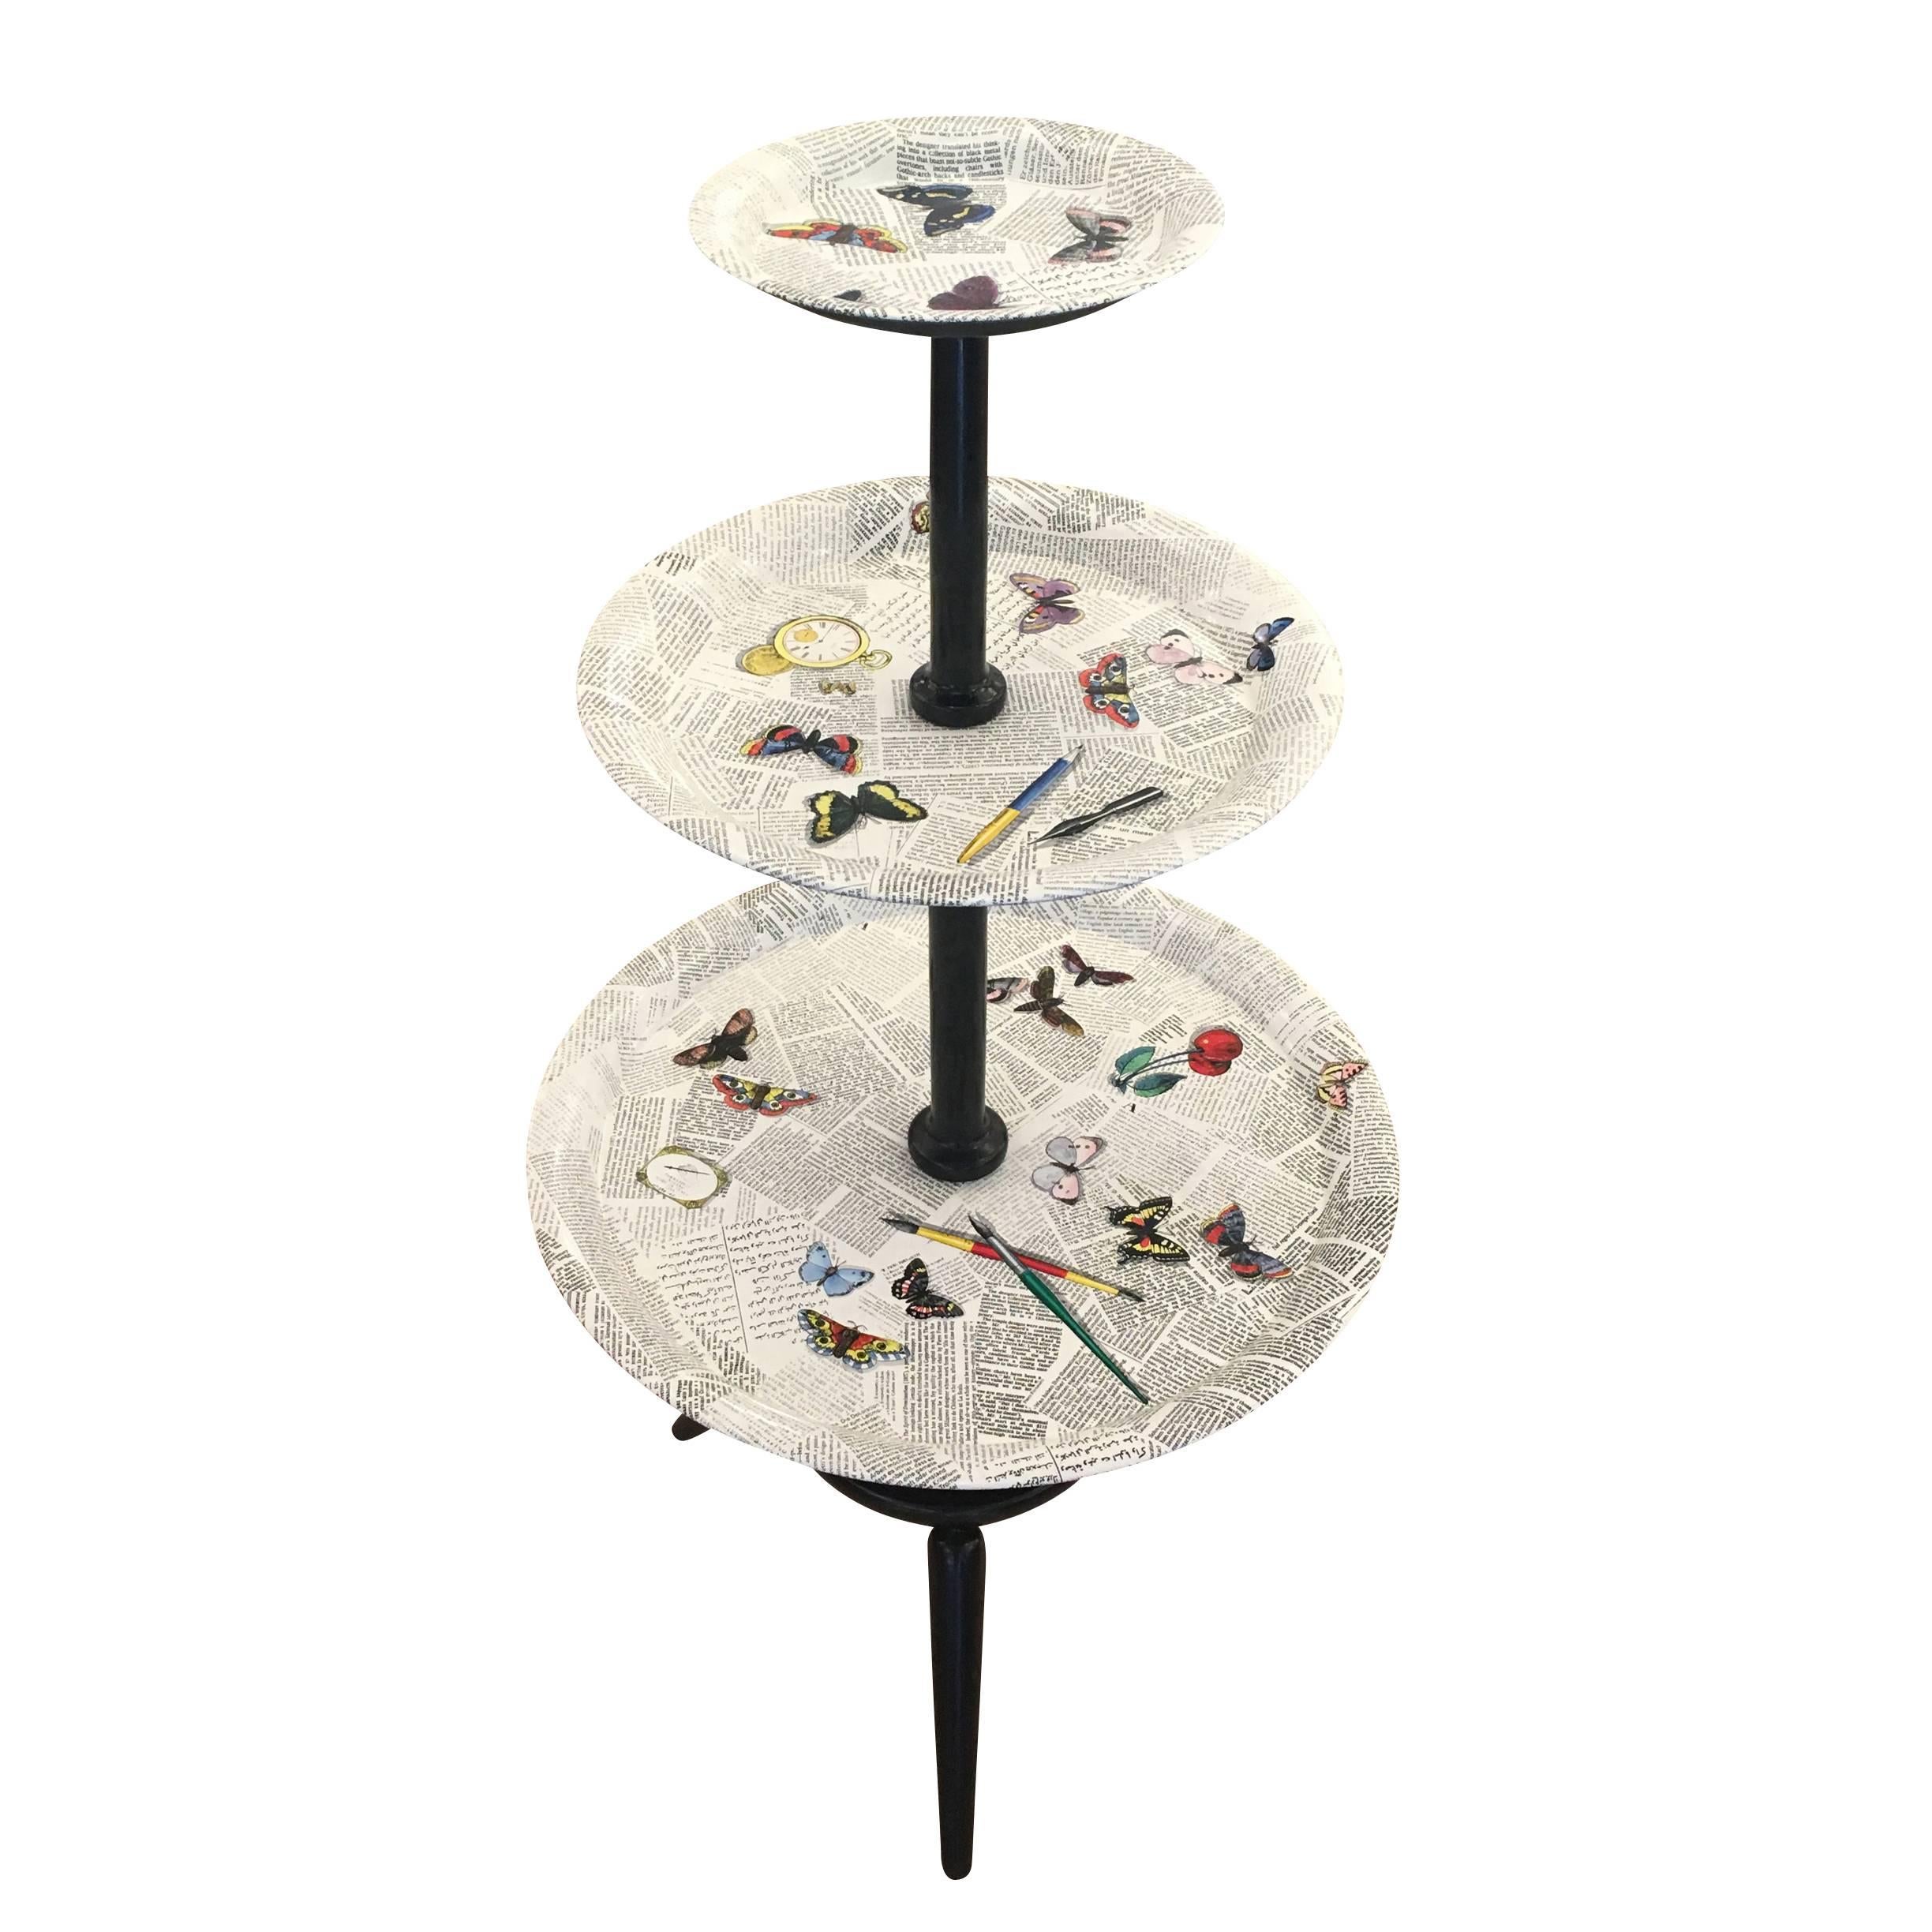 Elegant three-tiered table by Piero Fornasetti featuring a newspaper and butterfly motif. The newspaper motif is created by many overlapping articles about Fornasetti in different languages. Fun and curious to read! The three trays are metal while